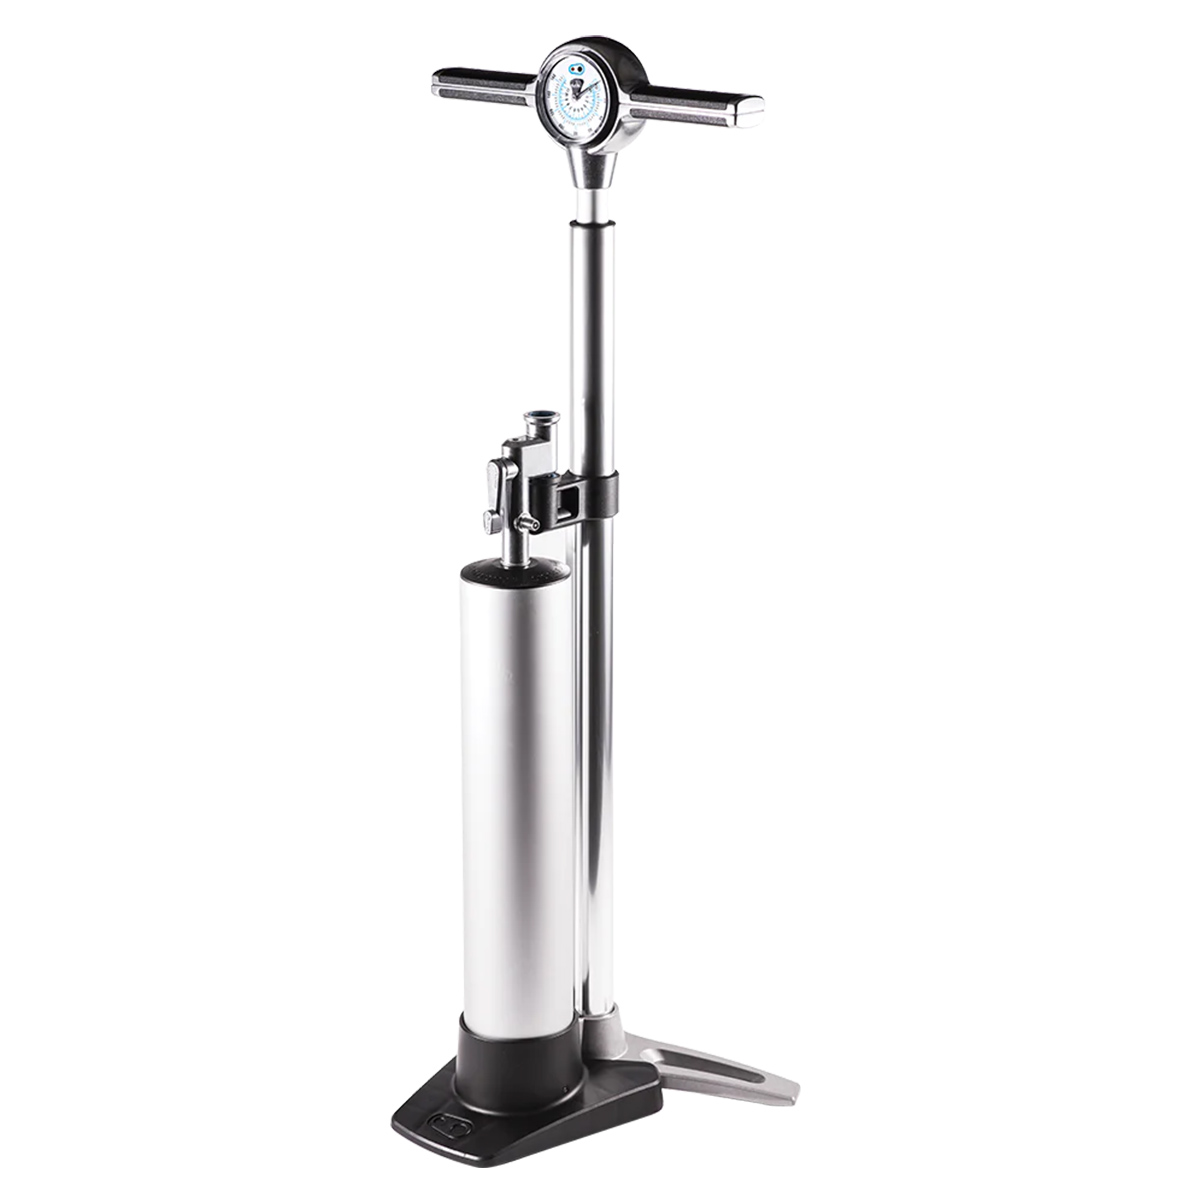 Klic Floor Pump with Compression Canister